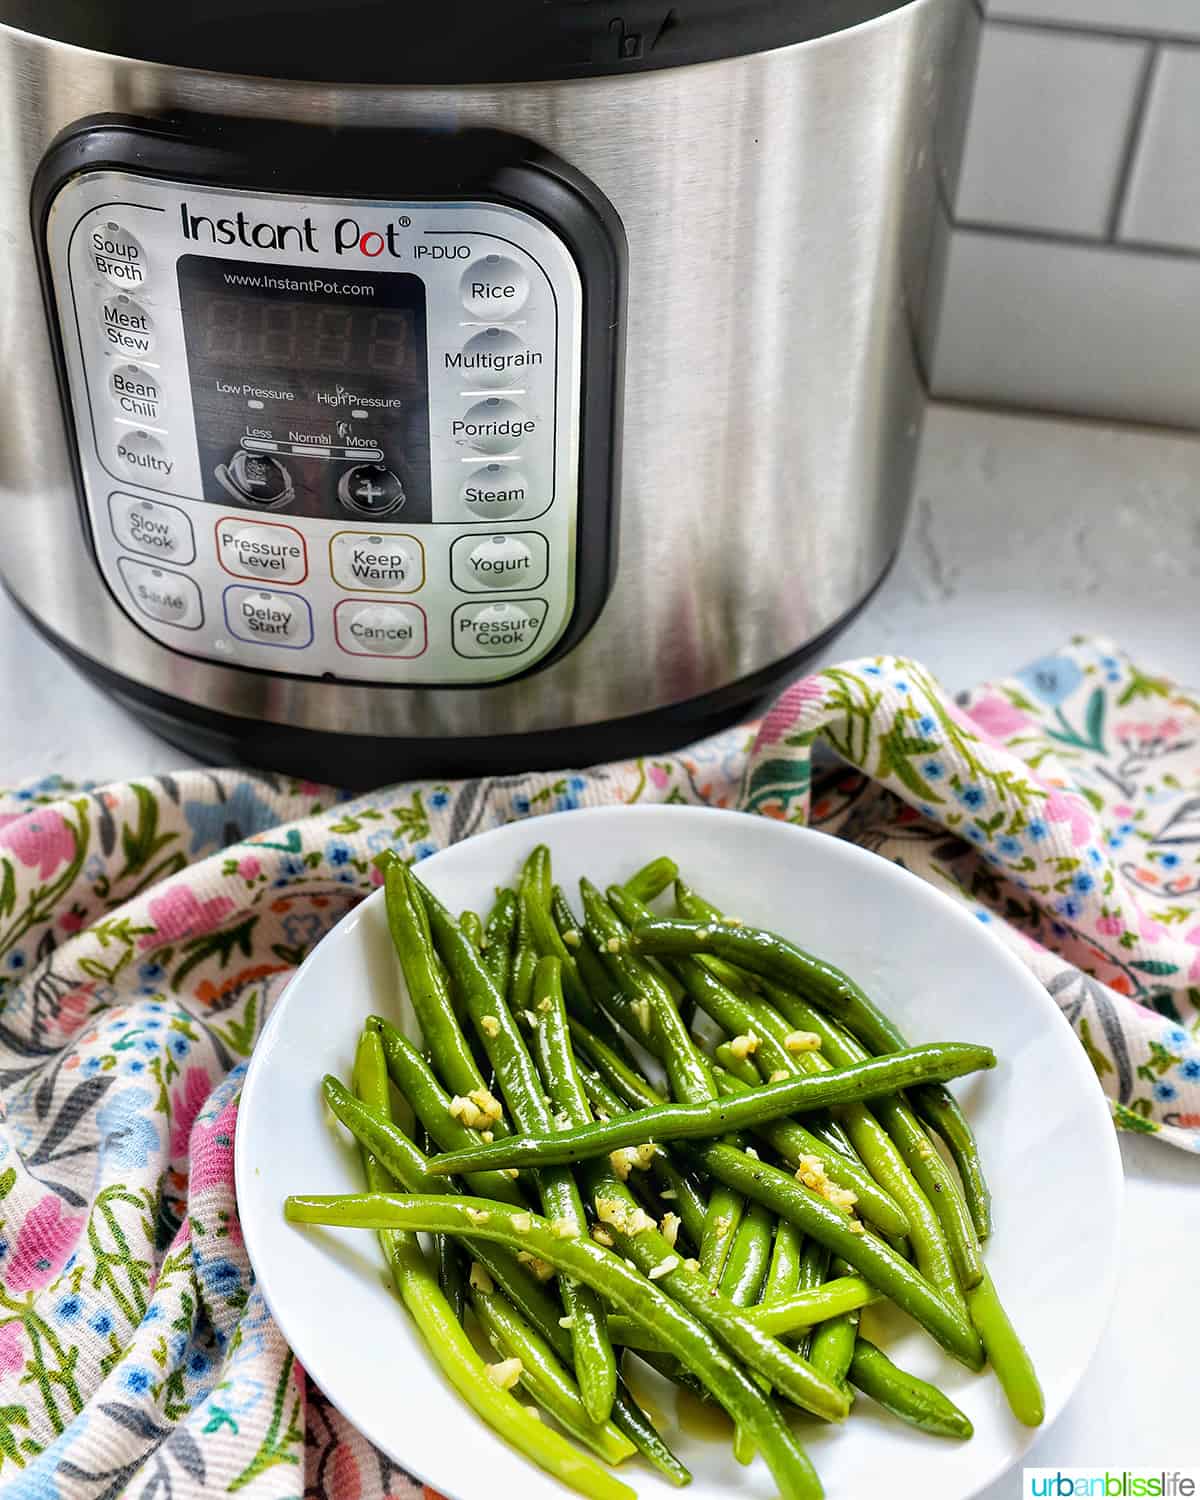 green beans with garlic in a white bowl in front of an Instant Pot pressure cooker.